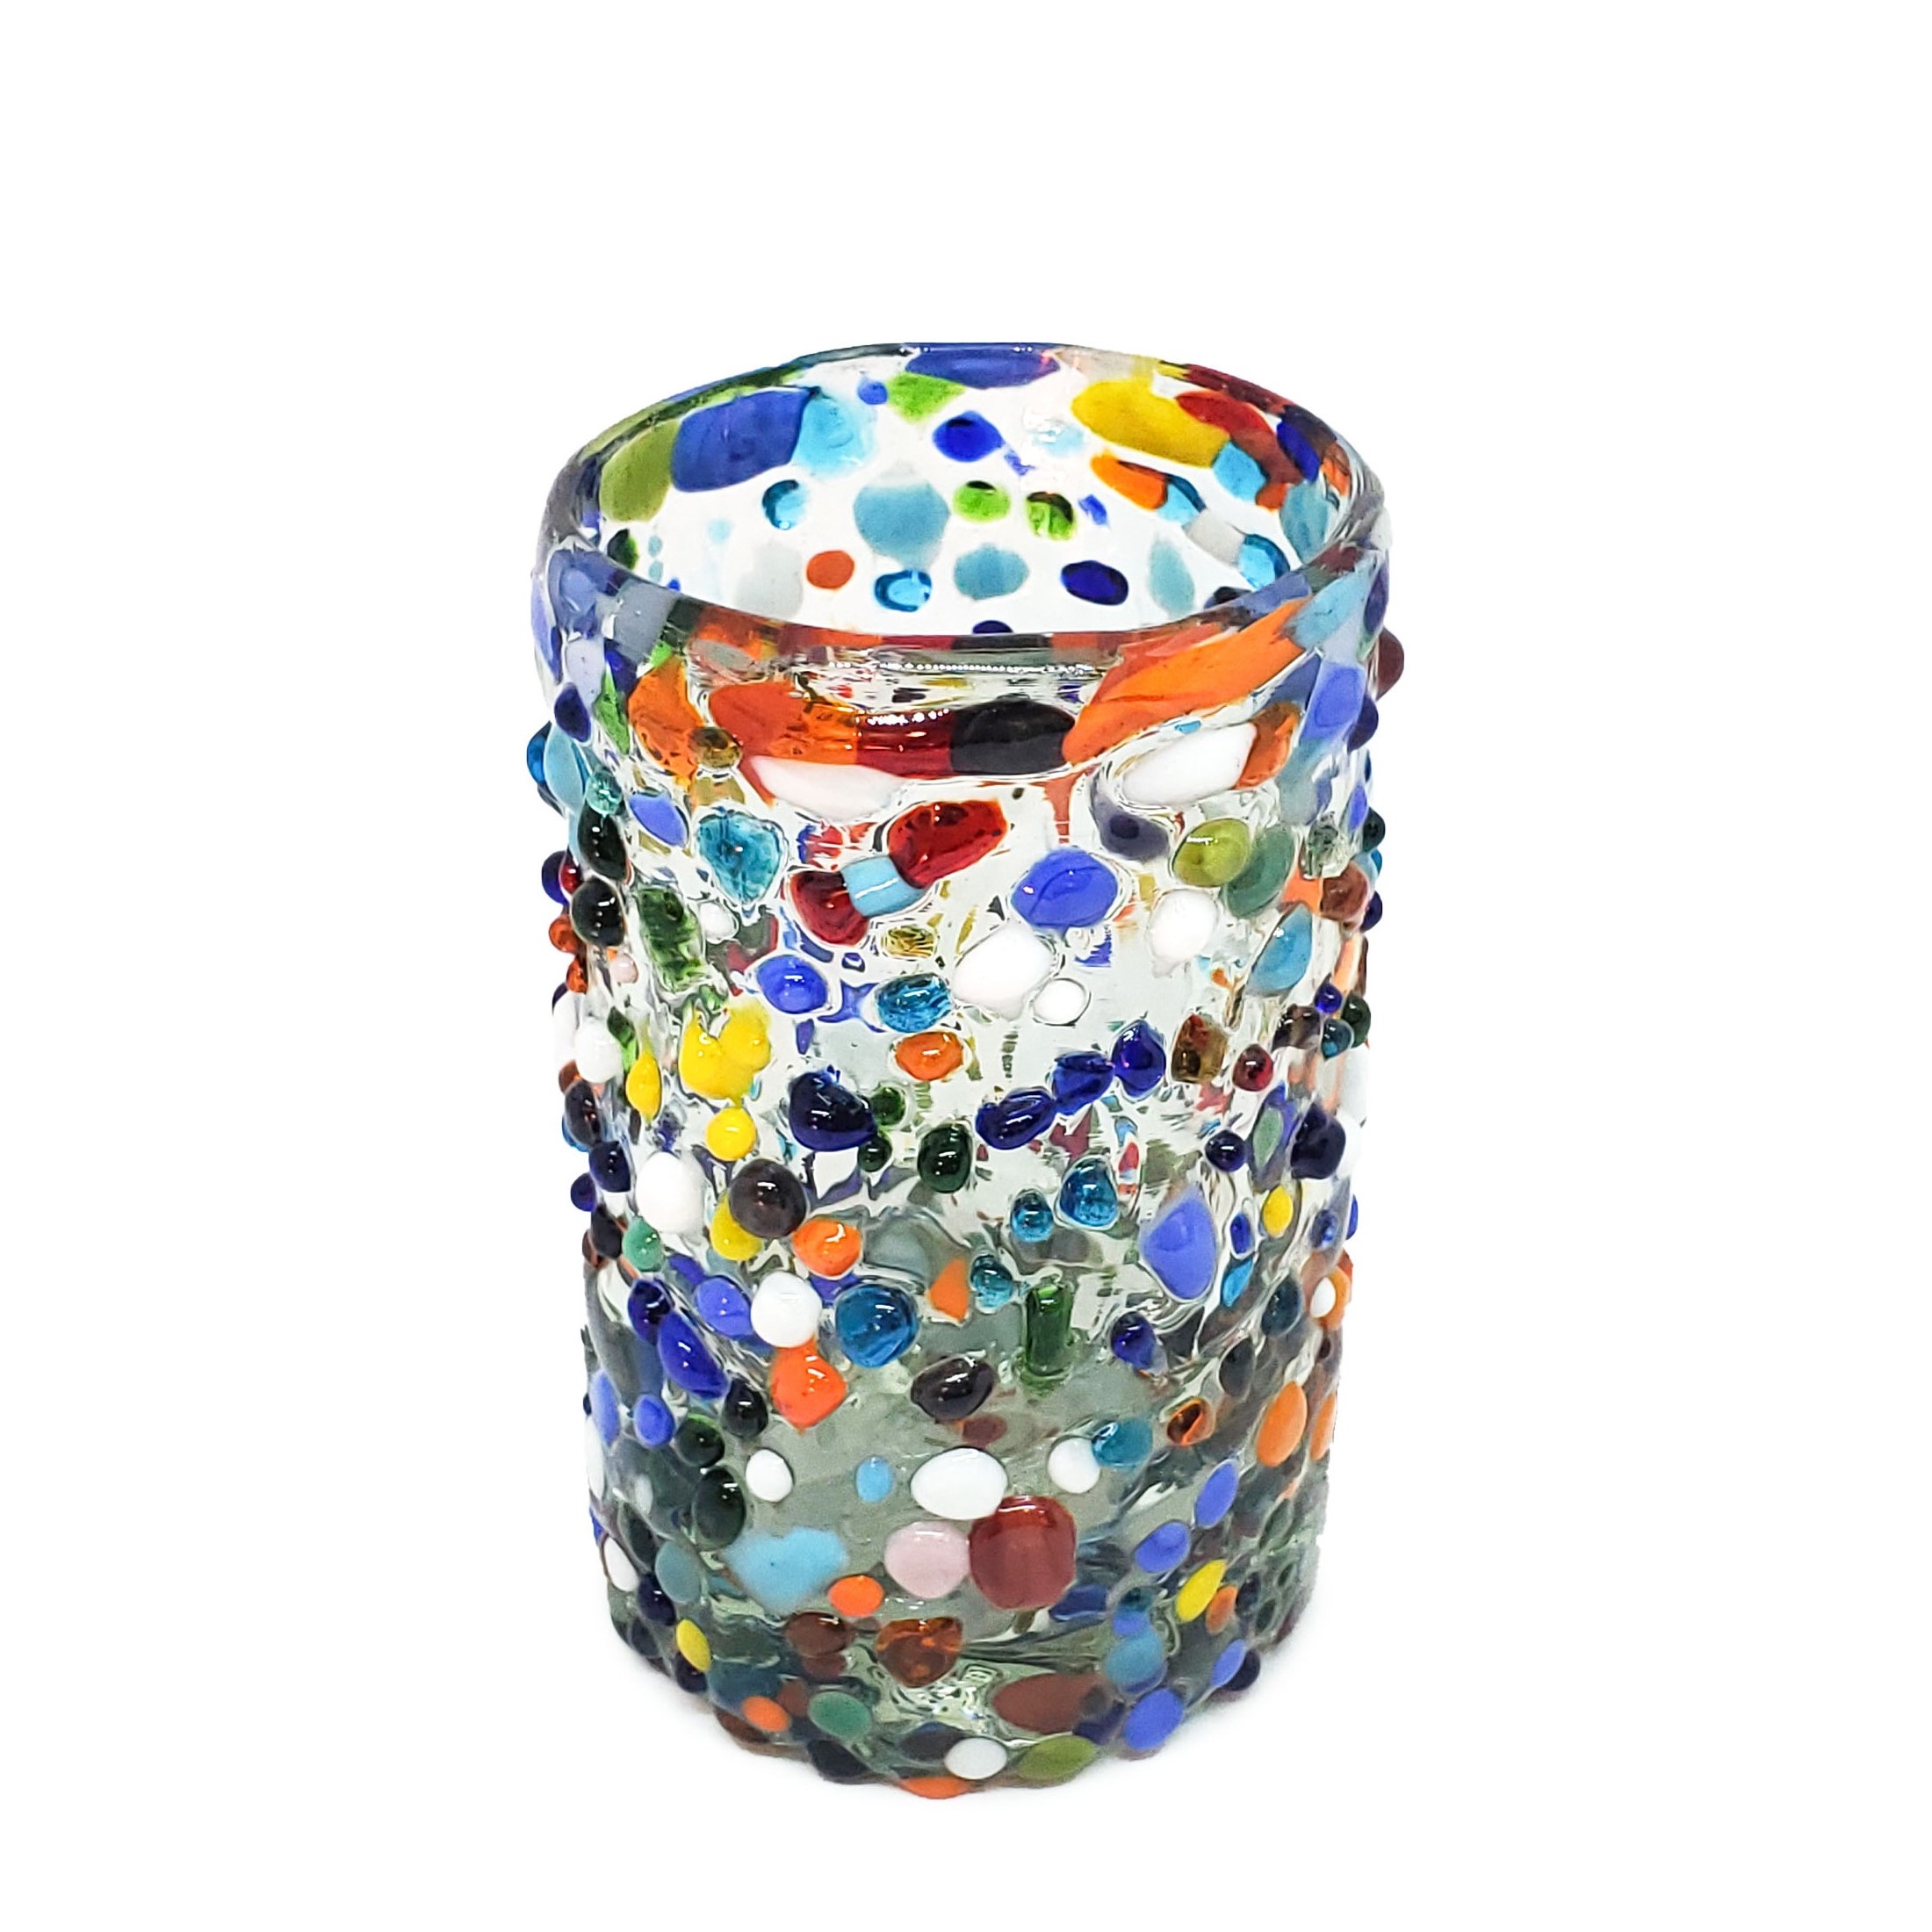 New Items / Confetti Rocks 9 oz Juice Glasses (set of 6) / Let the spring come into your home with this colorful set of glasses. The multicolor glass rocks decoration makes them a standout in any place.